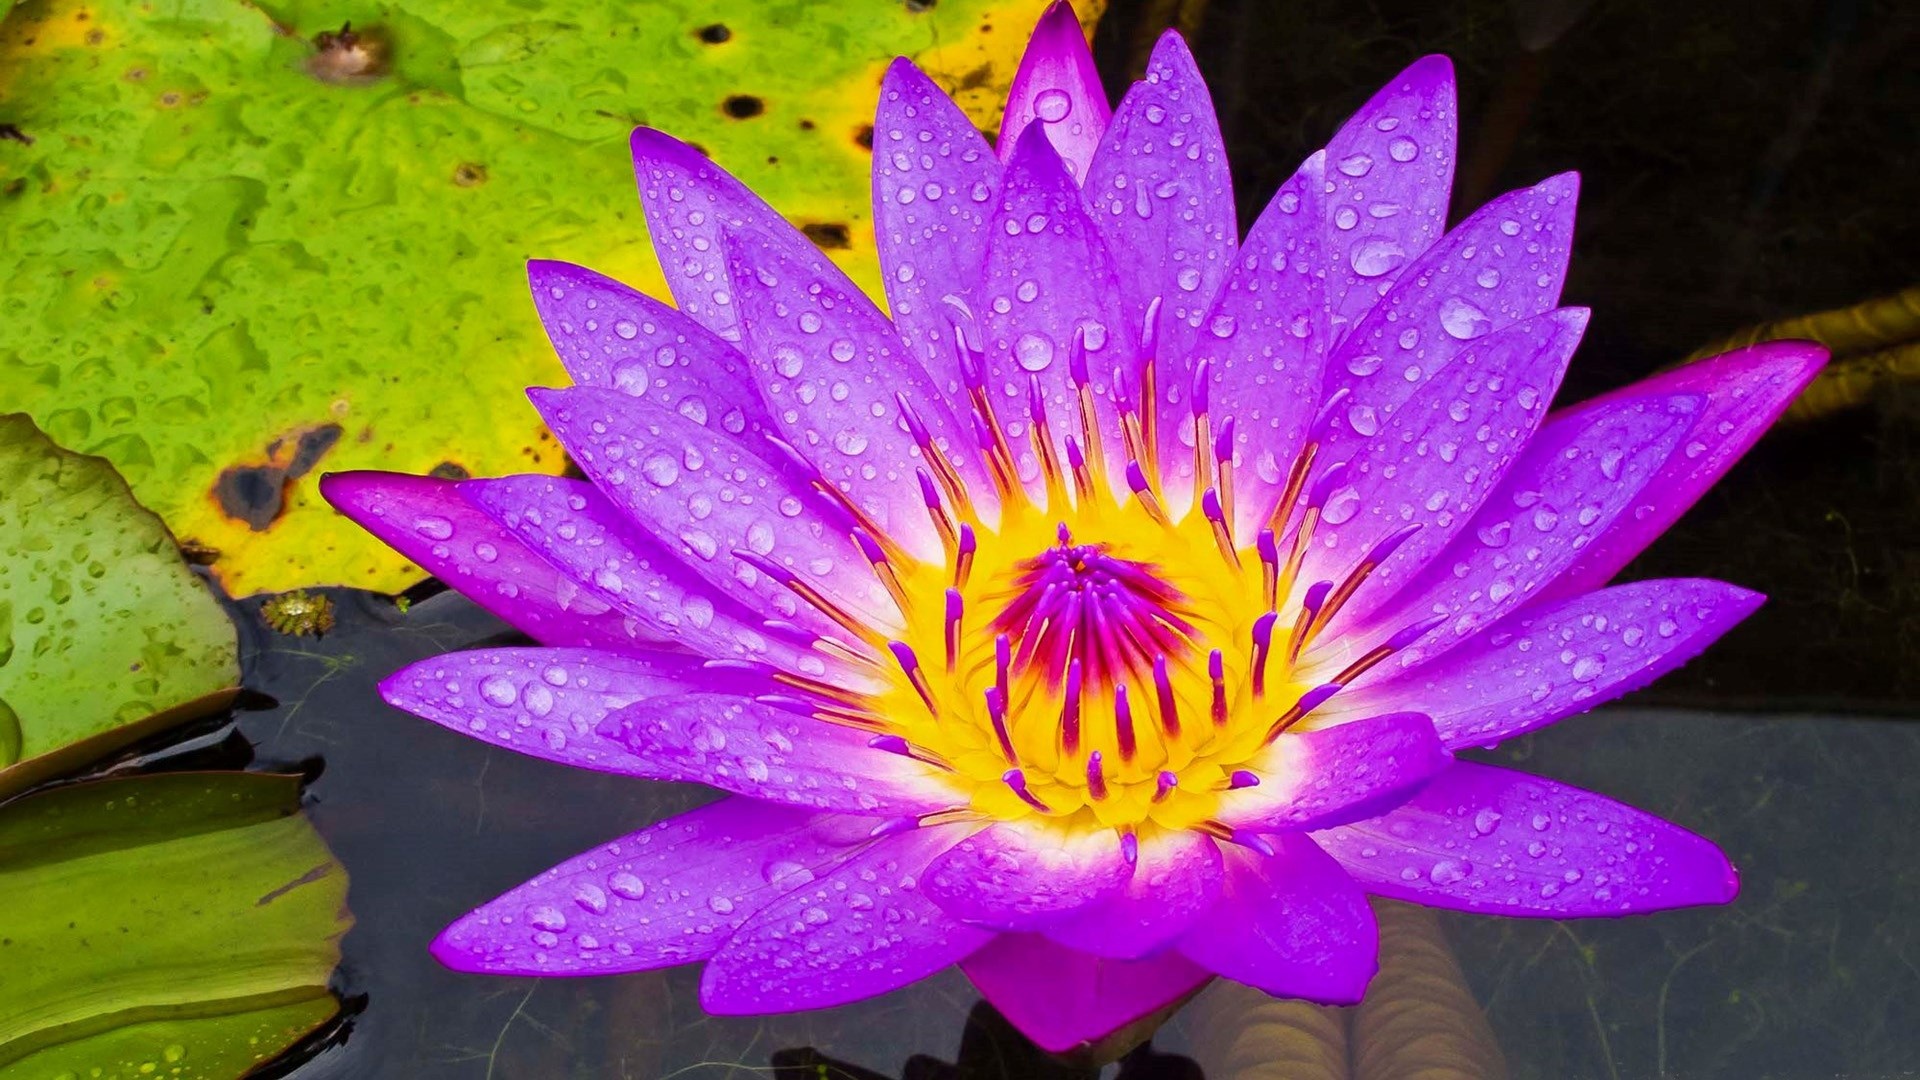 Lily Pad, Wallpaper choices, Nature aesthetic, Pond environment, 1920x1080 Full HD Desktop